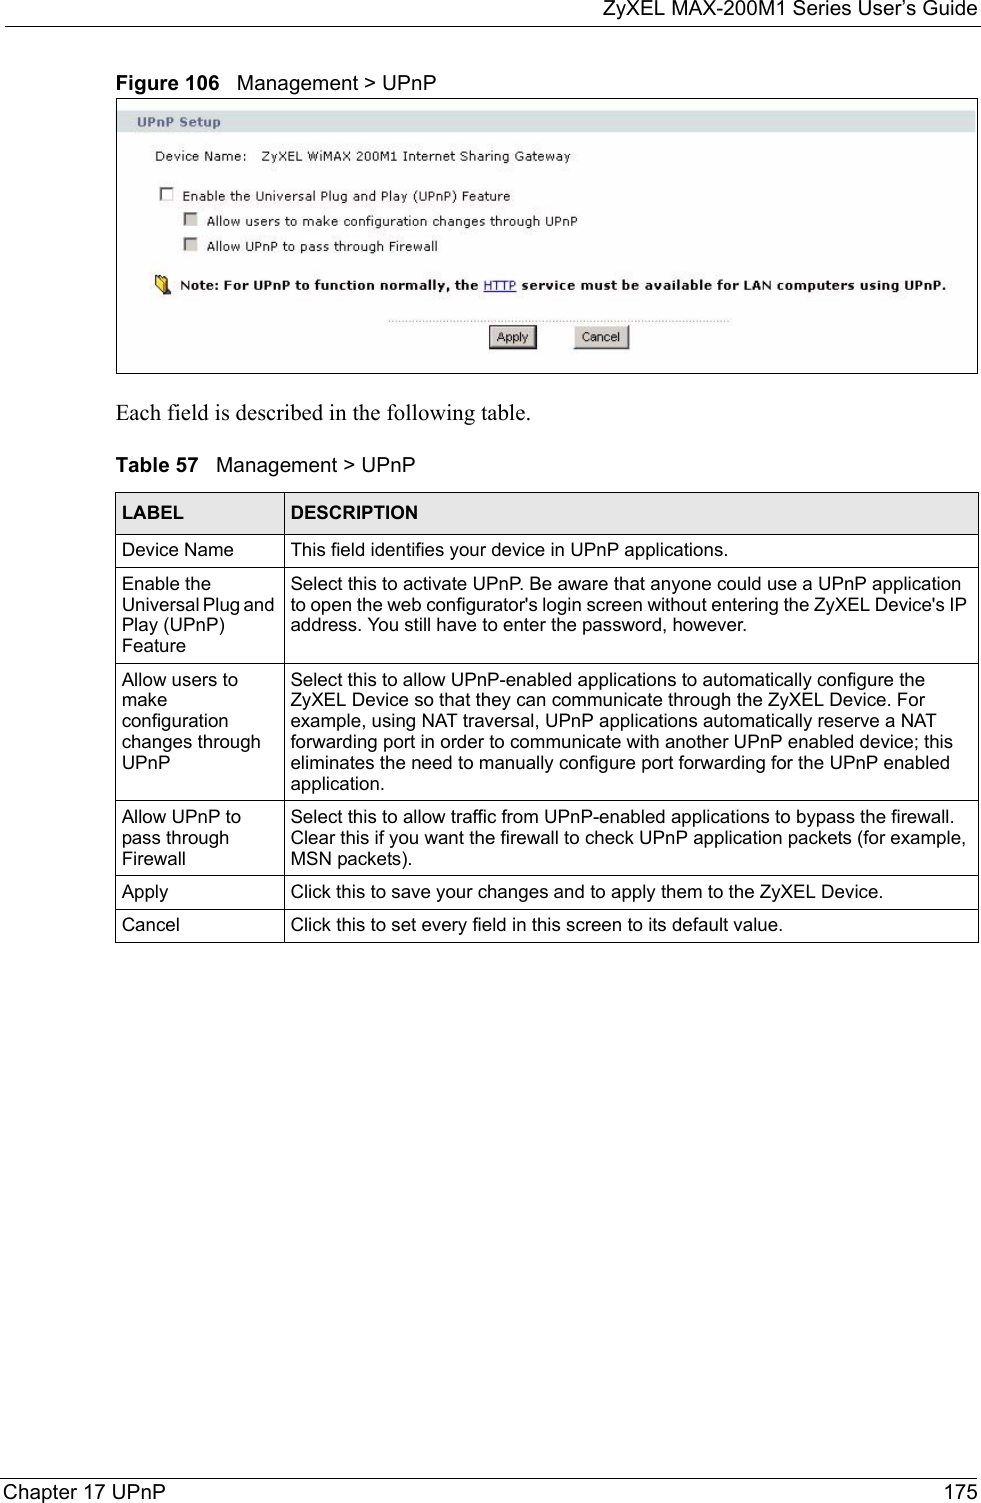 ZyXEL MAX-200M1 Series User’s GuideChapter 17 UPnP 175Figure 106   Management &gt; UPnPEach field is described in the following table.Table 57   Management &gt; UPnPLABEL DESCRIPTIONDevice Name This field identifies your device in UPnP applications.Enable the Universal Plug and Play (UPnP) Feature Select this to activate UPnP. Be aware that anyone could use a UPnP application to open the web configurator&apos;s login screen without entering the ZyXEL Device&apos;s IP address. You still have to enter the password, however.Allow users to make configuration changes through UPnPSelect this to allow UPnP-enabled applications to automatically configure the ZyXEL Device so that they can communicate through the ZyXEL Device. For example, using NAT traversal, UPnP applications automatically reserve a NAT forwarding port in order to communicate with another UPnP enabled device; this eliminates the need to manually configure port forwarding for the UPnP enabled application. Allow UPnP to pass through FirewallSelect this to allow traffic from UPnP-enabled applications to bypass the firewall. Clear this if you want the firewall to check UPnP application packets (for example, MSN packets).Apply Click this to save your changes and to apply them to the ZyXEL Device.Cancel Click this to set every field in this screen to its default value.